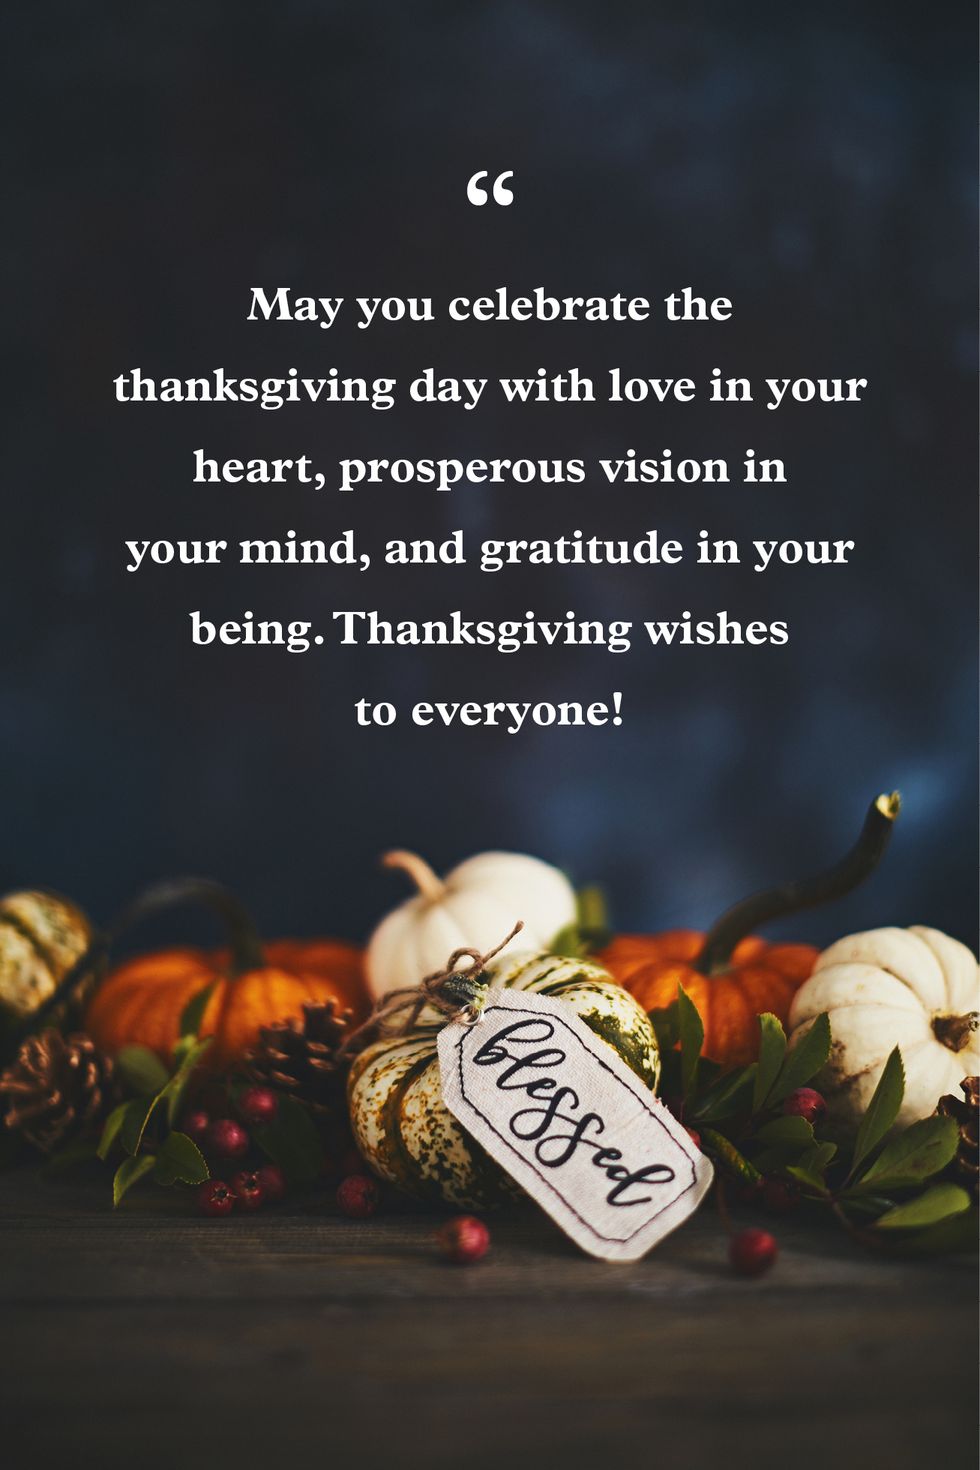 https://hips.hearstapps.com/hmg-prod/images/thanksgiving-greetings2-1628732865.jpg?crop=1xw:1xh;center,top&resize=980:*